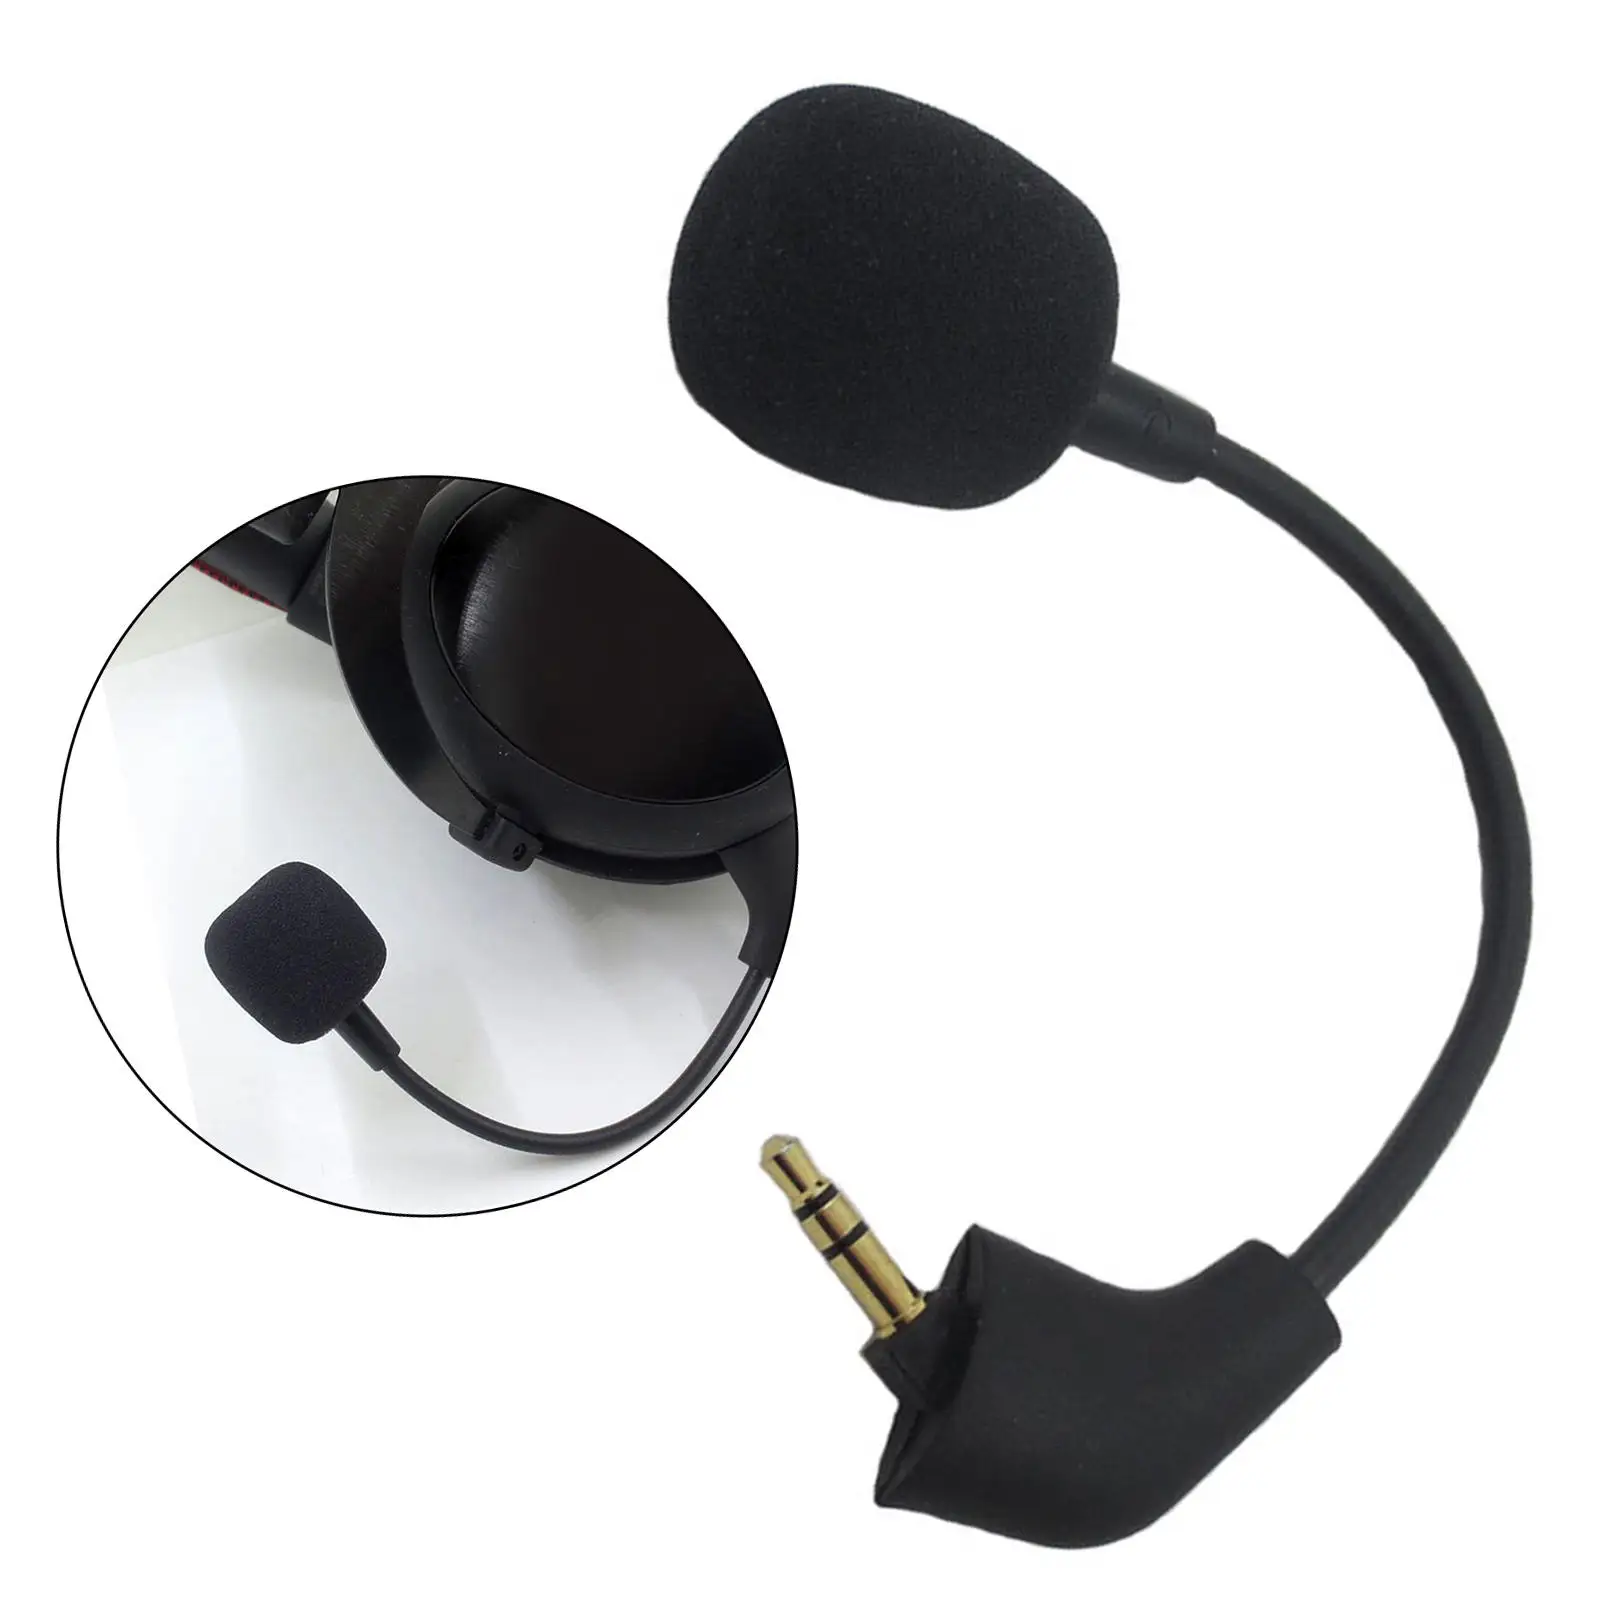 Headphone Replaces Microphone Black Detachable ZS0200 with Foam Cover for Hyperx Cloud II